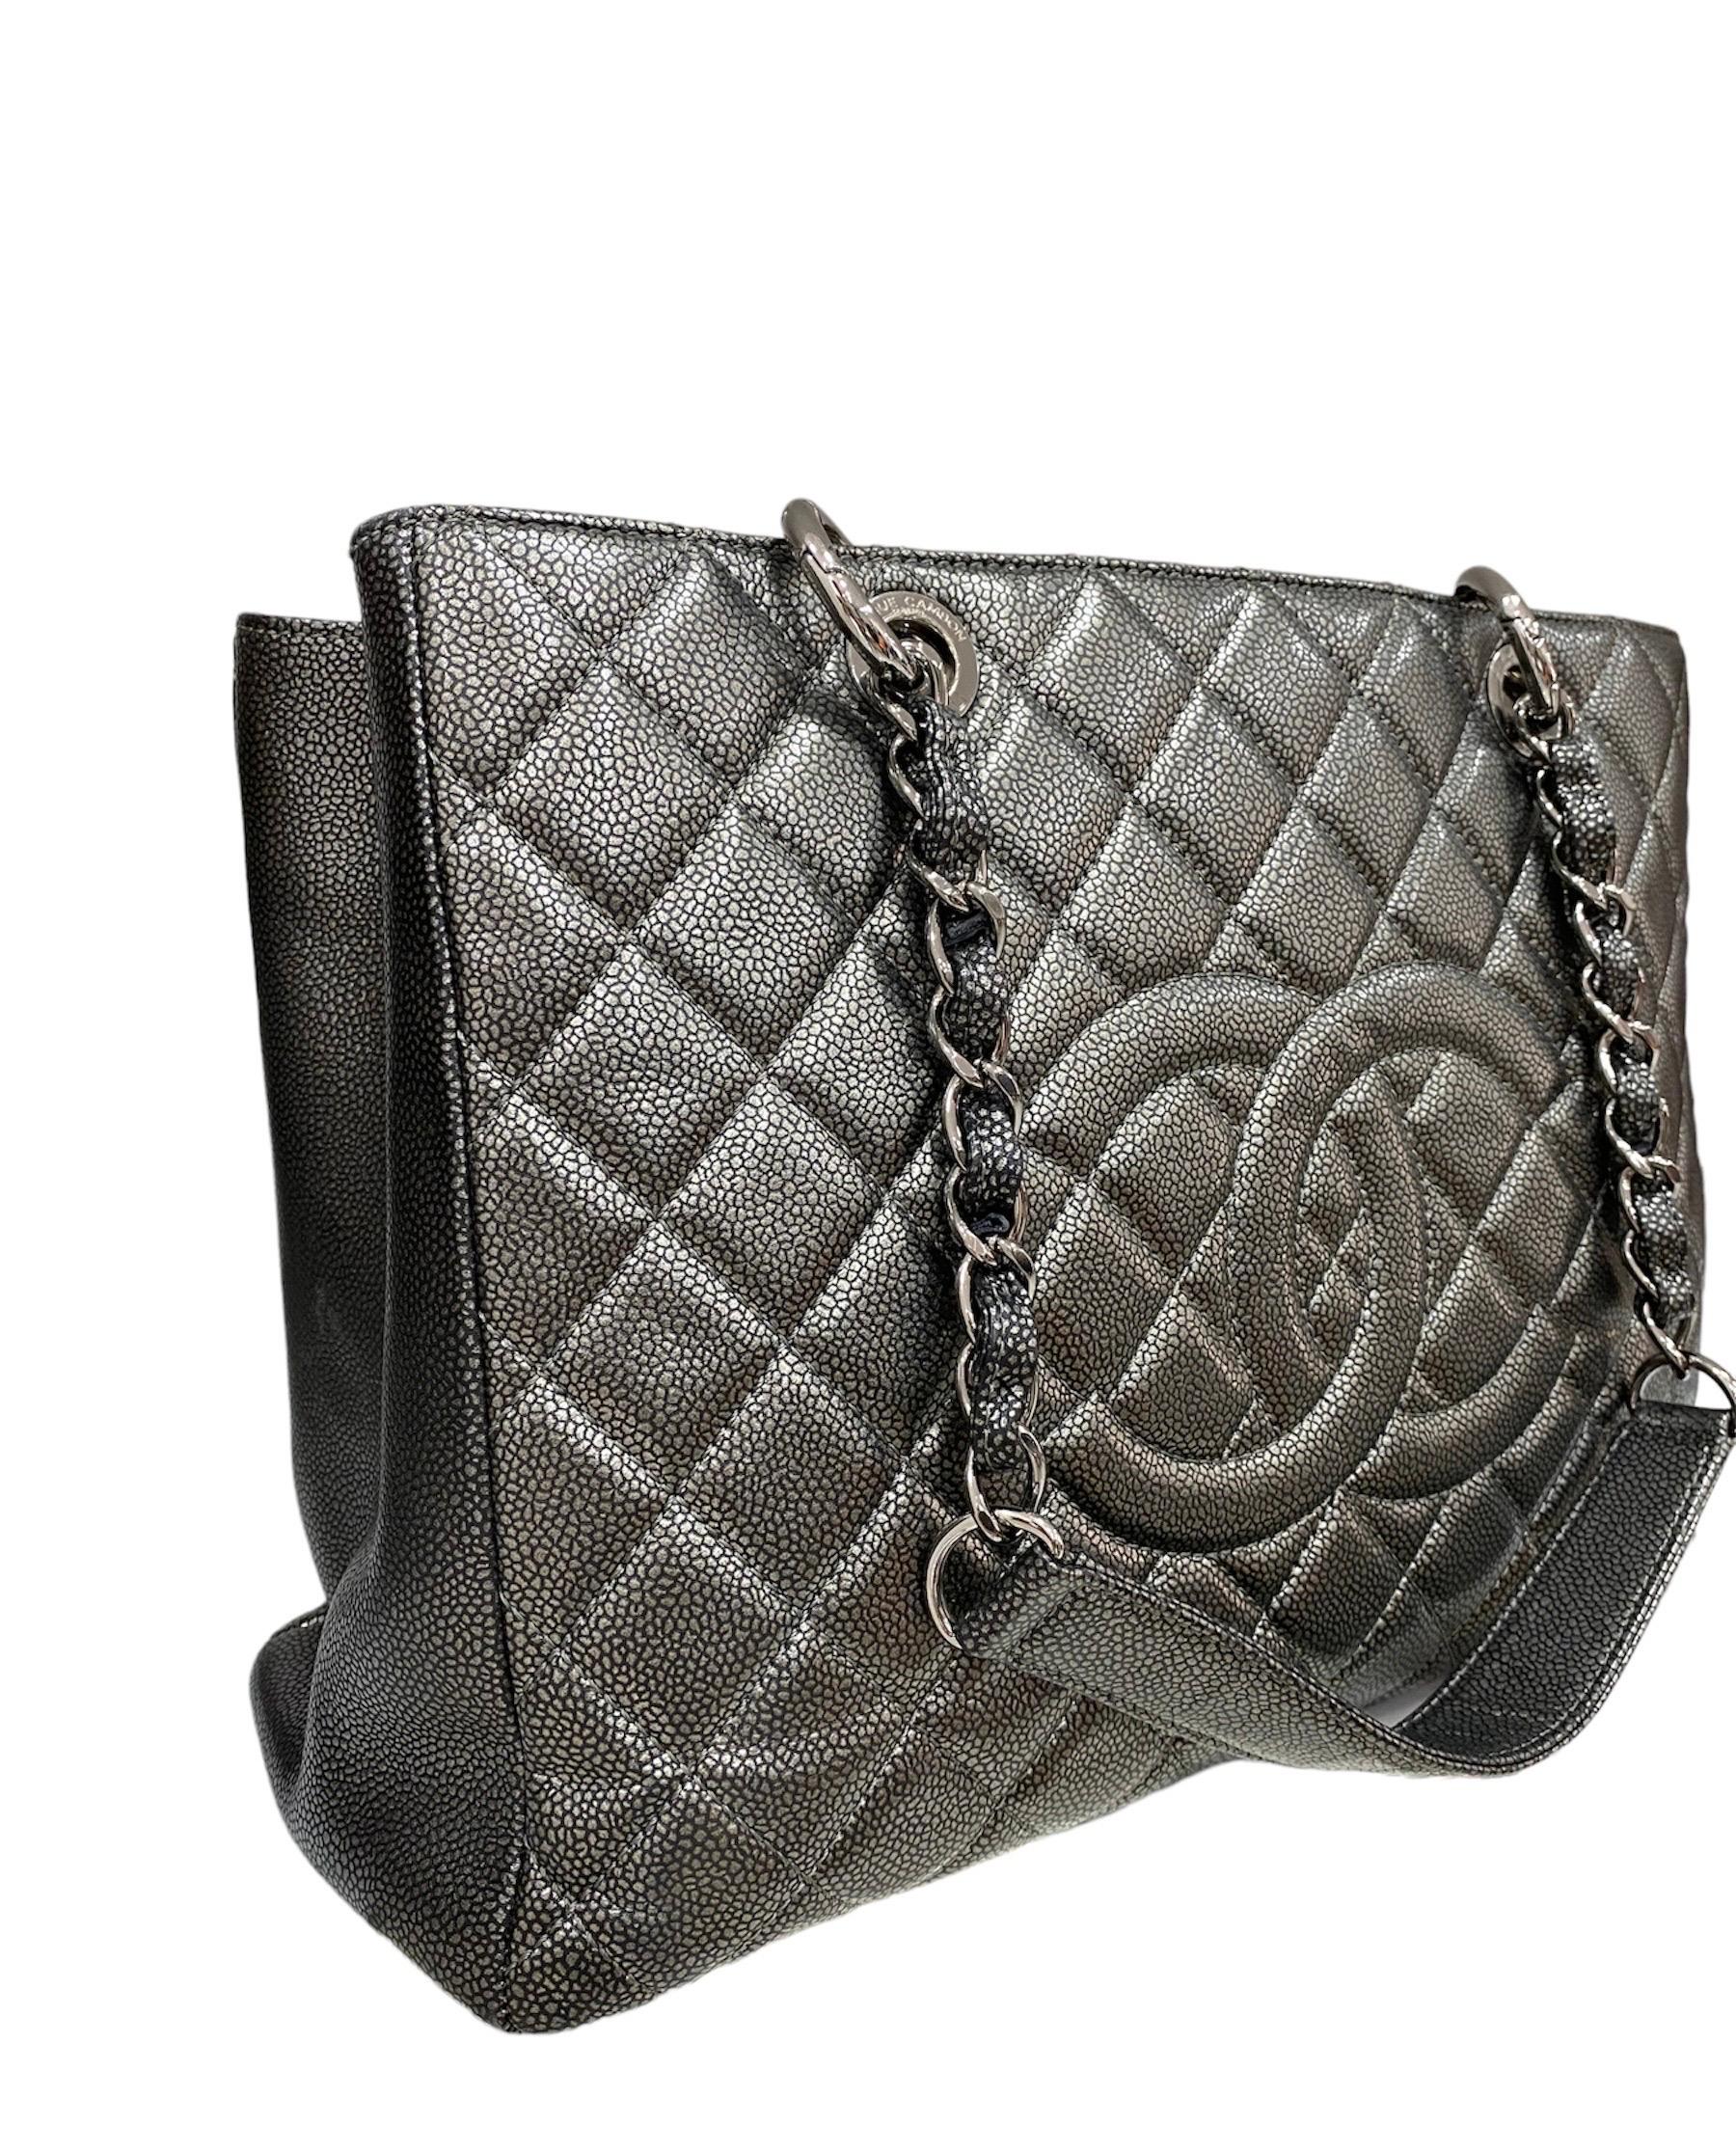 Chanel GST model shoulder bag in metallic gray quilted leather with silver hardware.

It has a large central opening. The inside of the bag is divided into two large compartments divided by a large central pocket with zip closure. The interior is